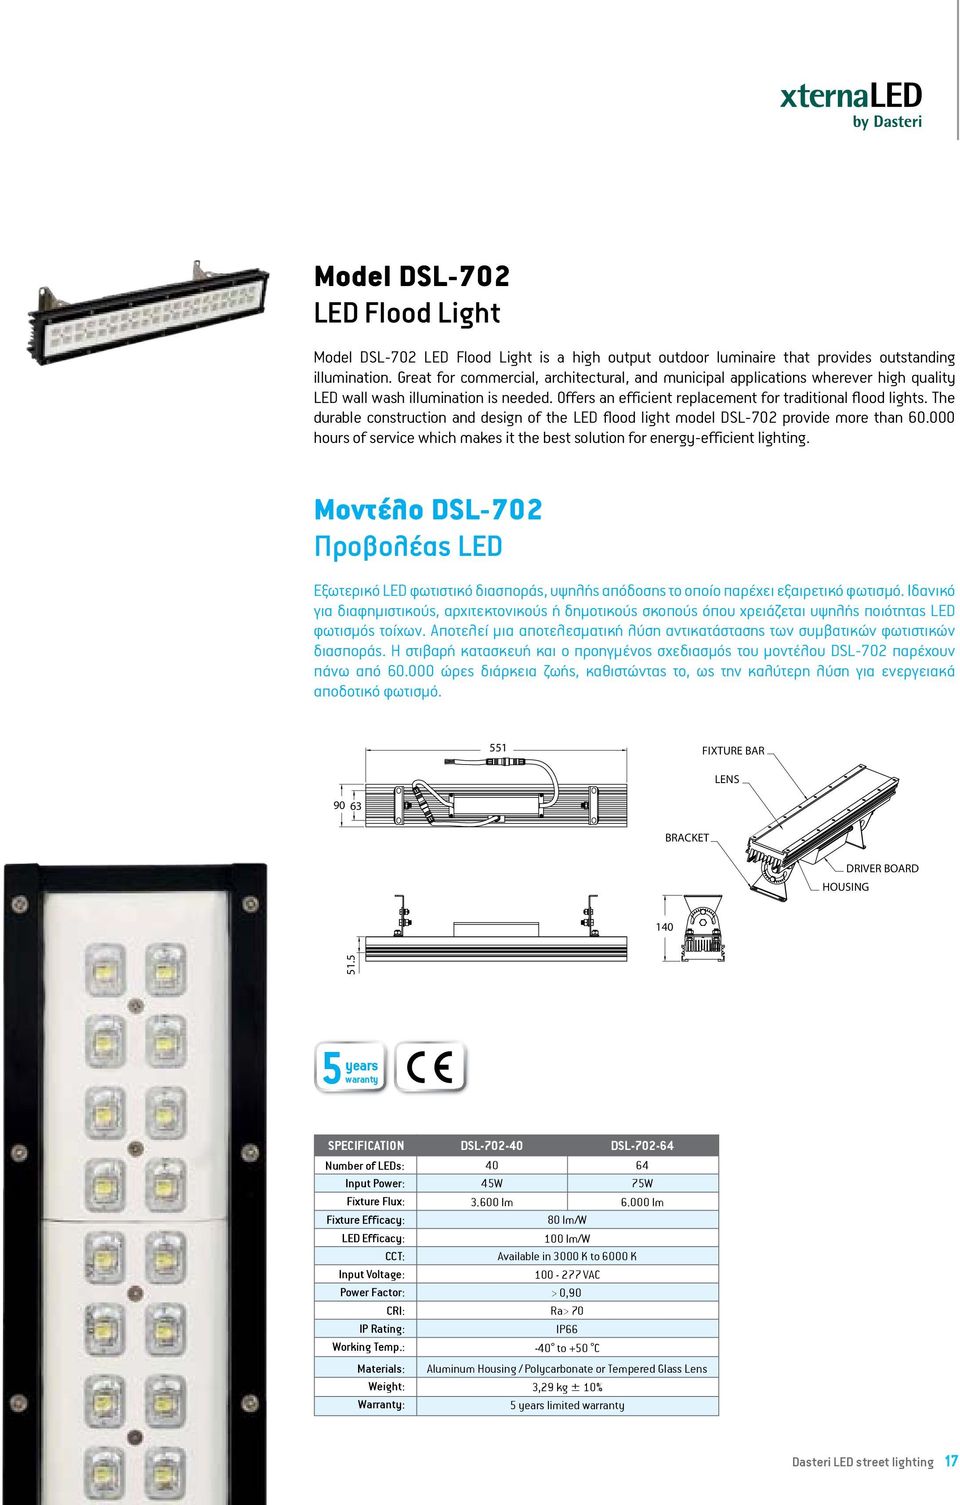 The durable construction and design of the LED flood light model DSL-702 provide more than 60.000 hours of service which makes it the best solution for energy-efficient lighting.